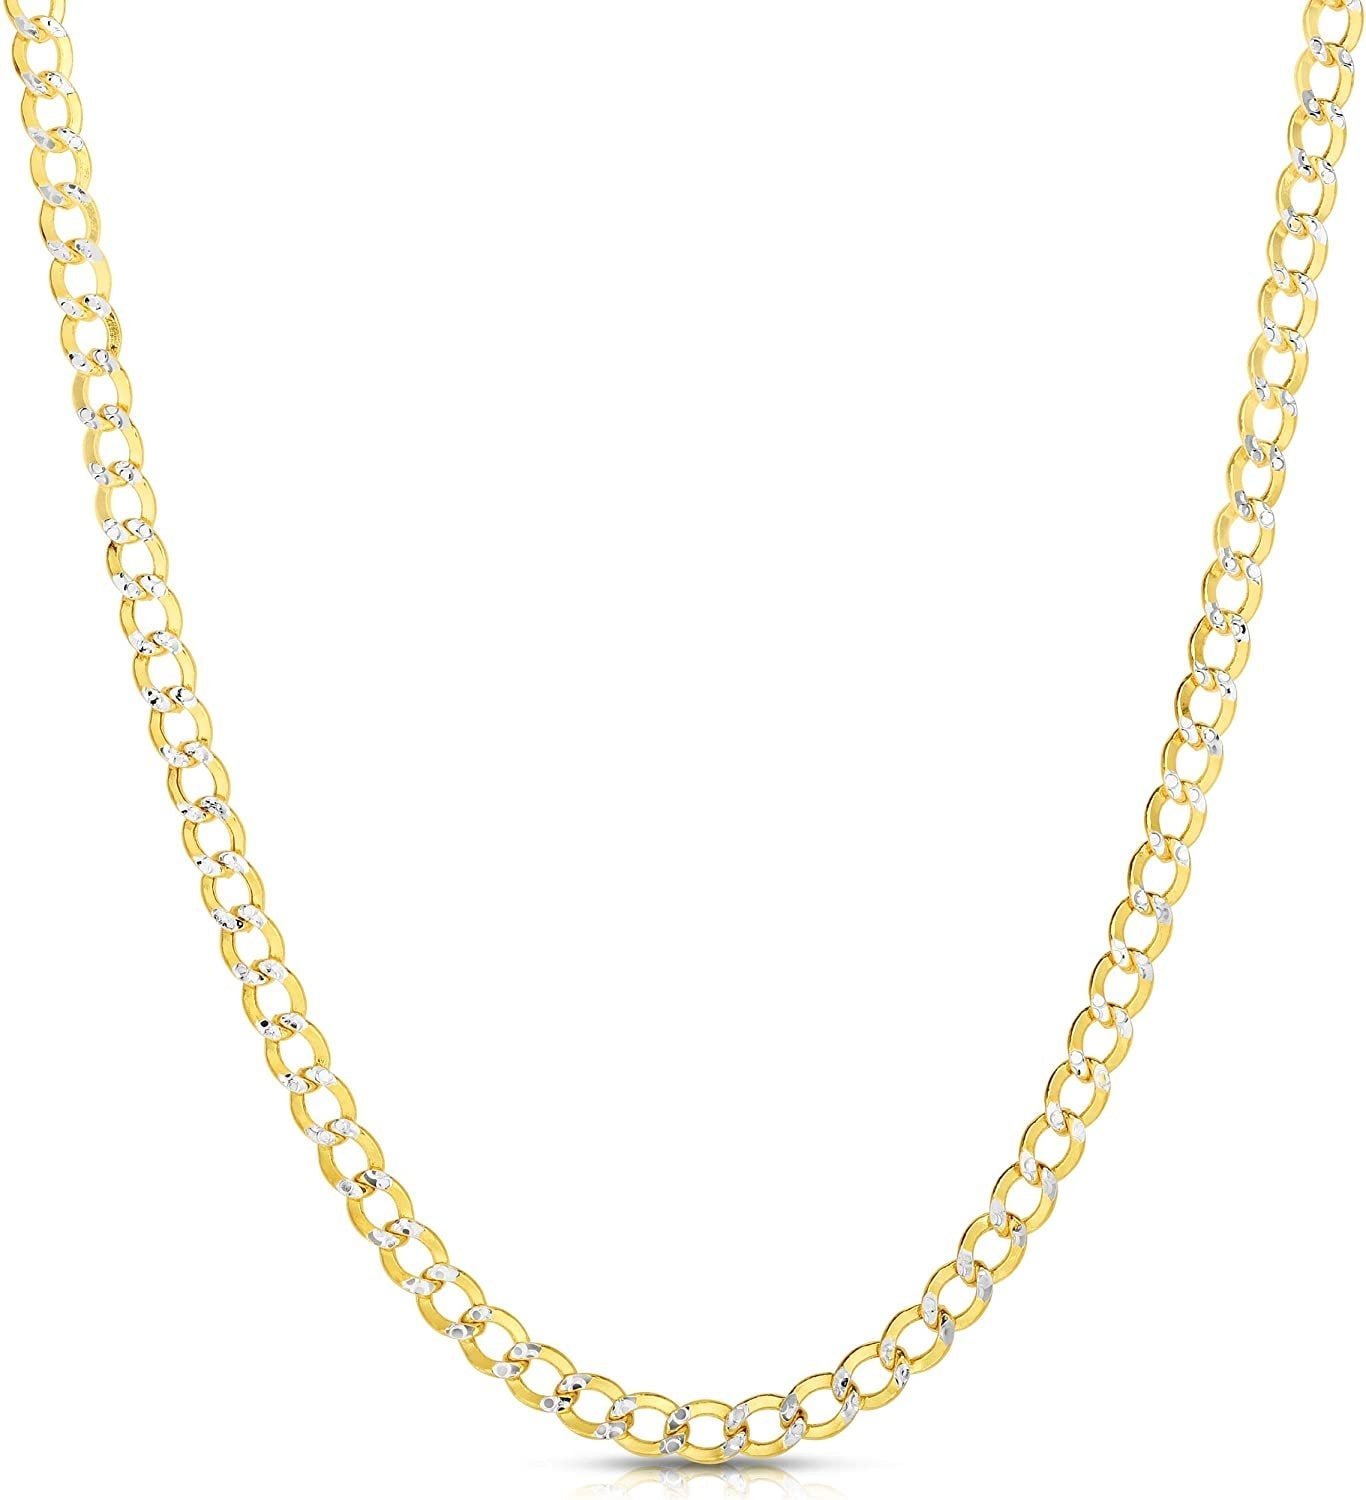 10k Two Tone Fine Gold 3.5mm Lightweight Curb Chain Necklace